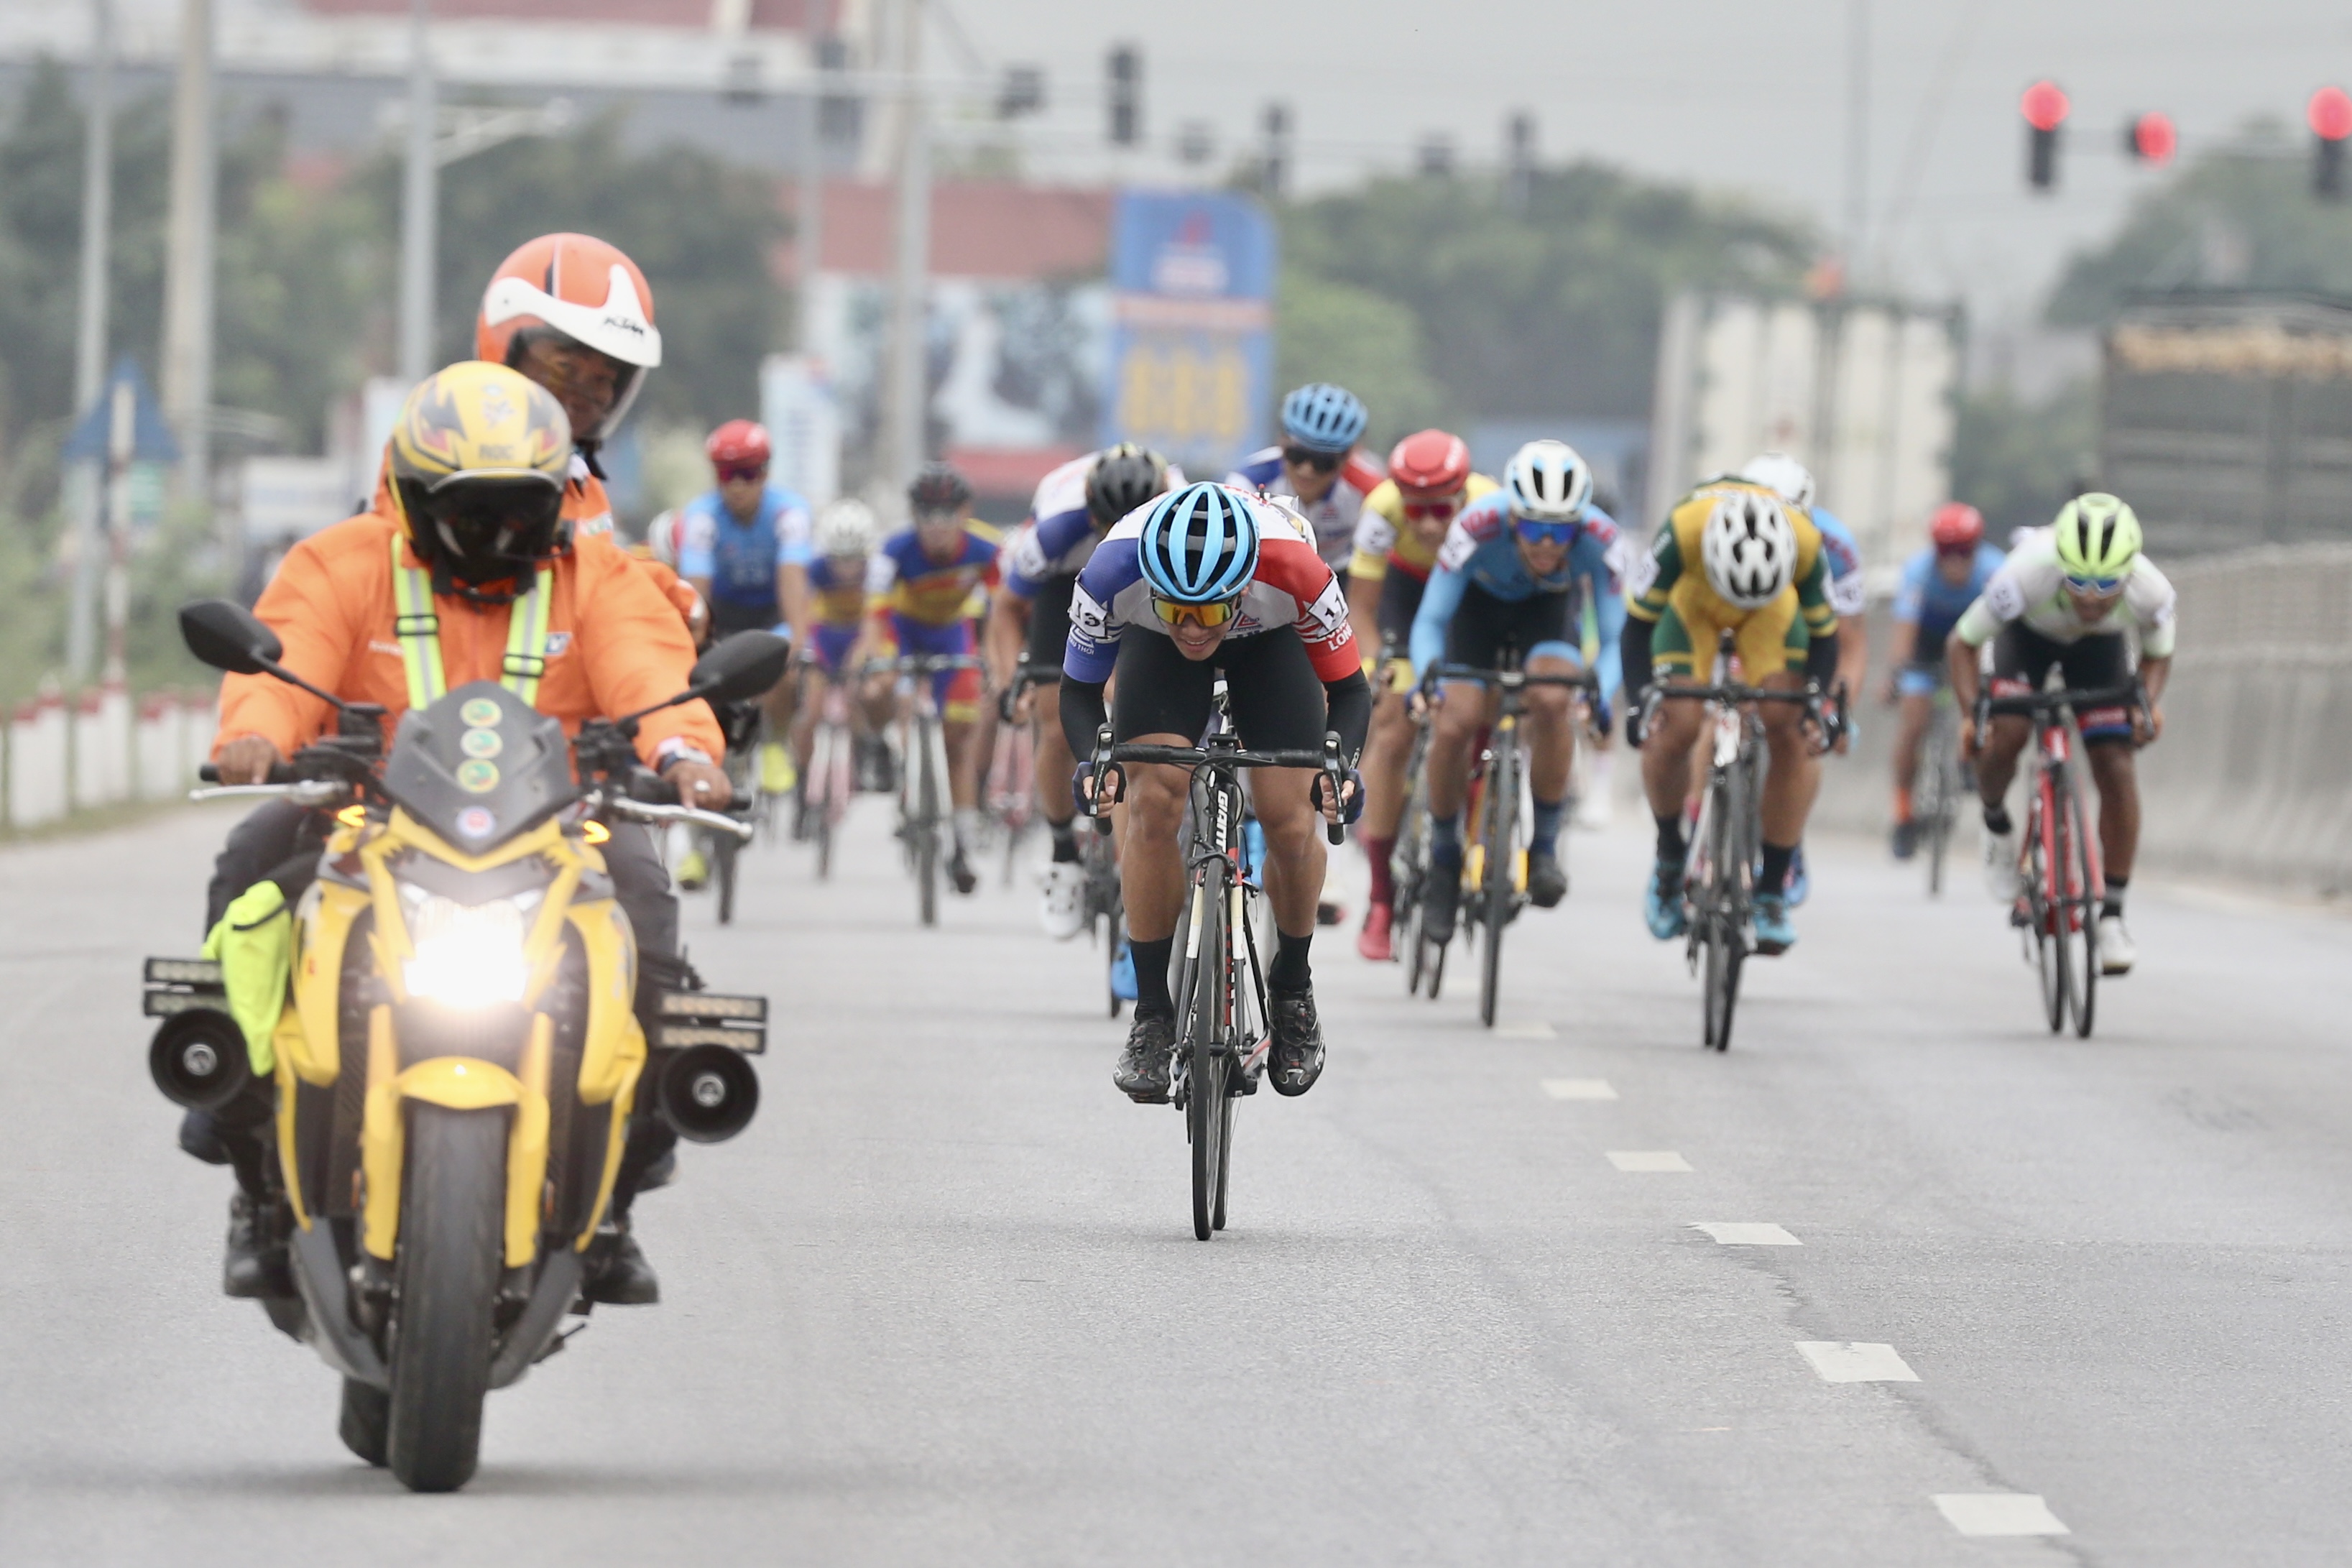 Cyclists race in the eighth stage of the 2022 Ho Chi Minh City TV (HTV) Cup tournament from Thanh Hoa Province to Nghe An Province, Vietnam, April 12, 2022. Photo: M.Q. / Tuoi Tre